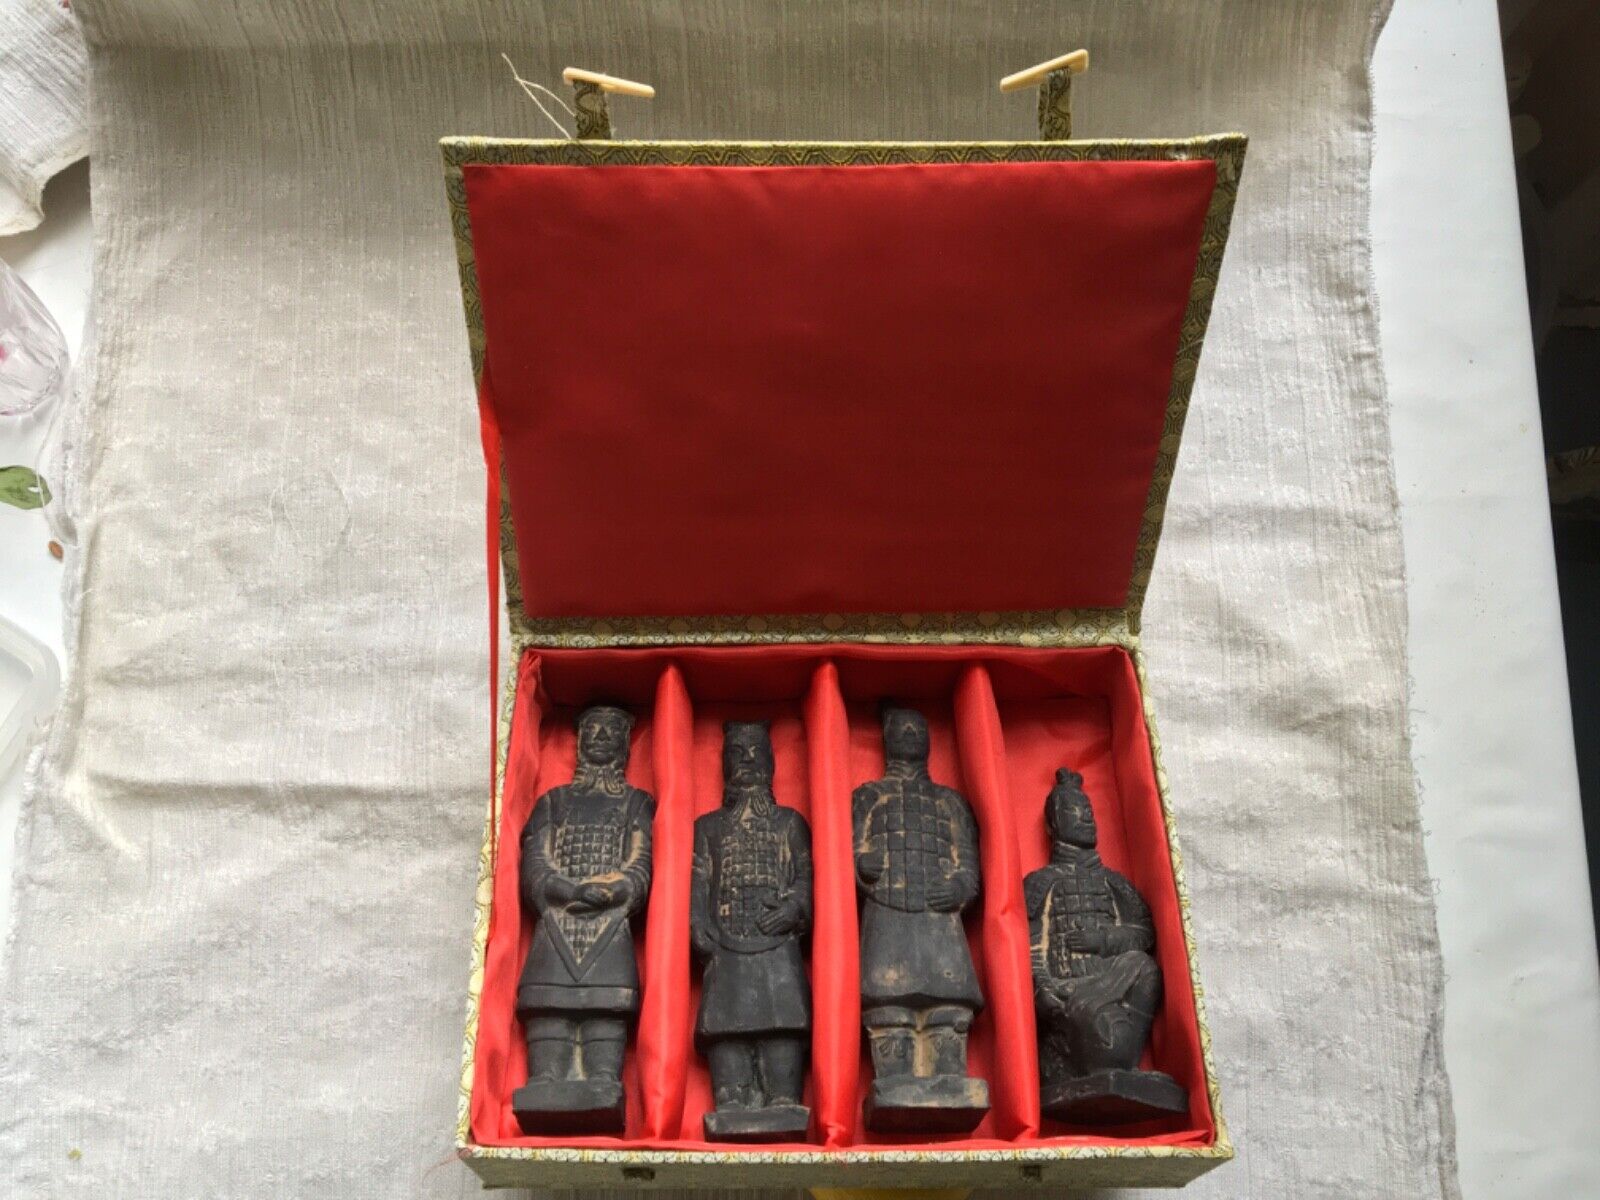 Antique Valuations: Ancient Chinese Terracotta Army Figurines (charcoal finish) x 4 in display box